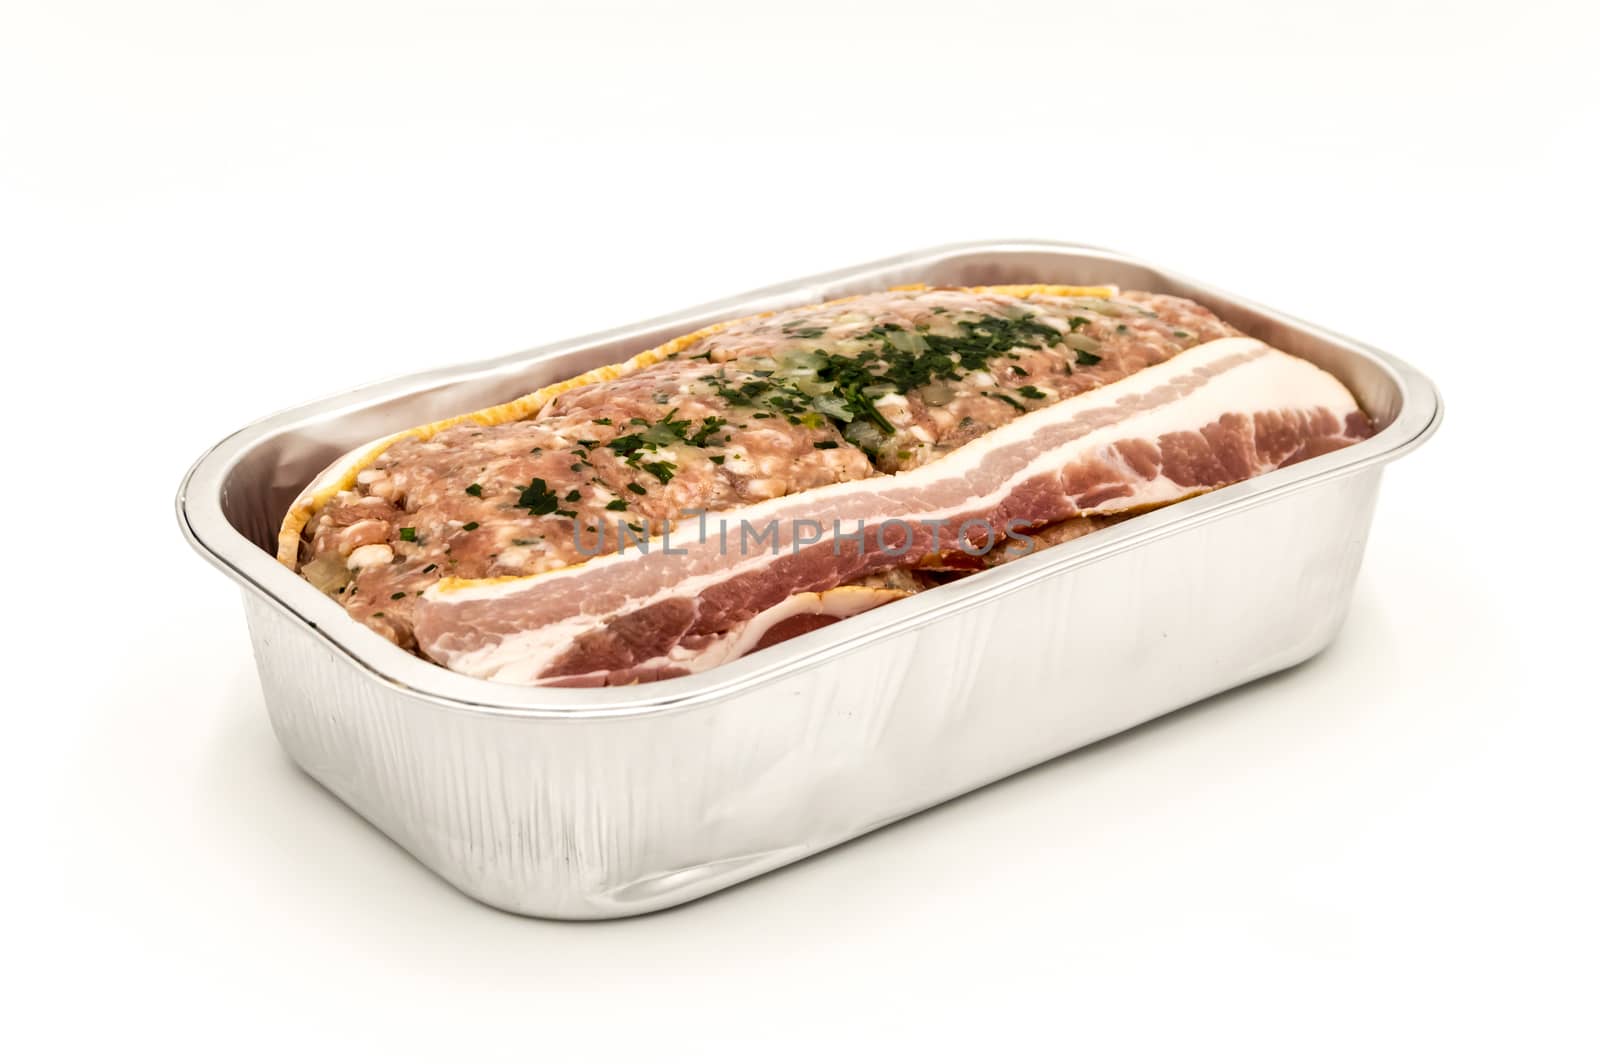 Meatloaf ready to bake in its aluminum tray  by Philou1000